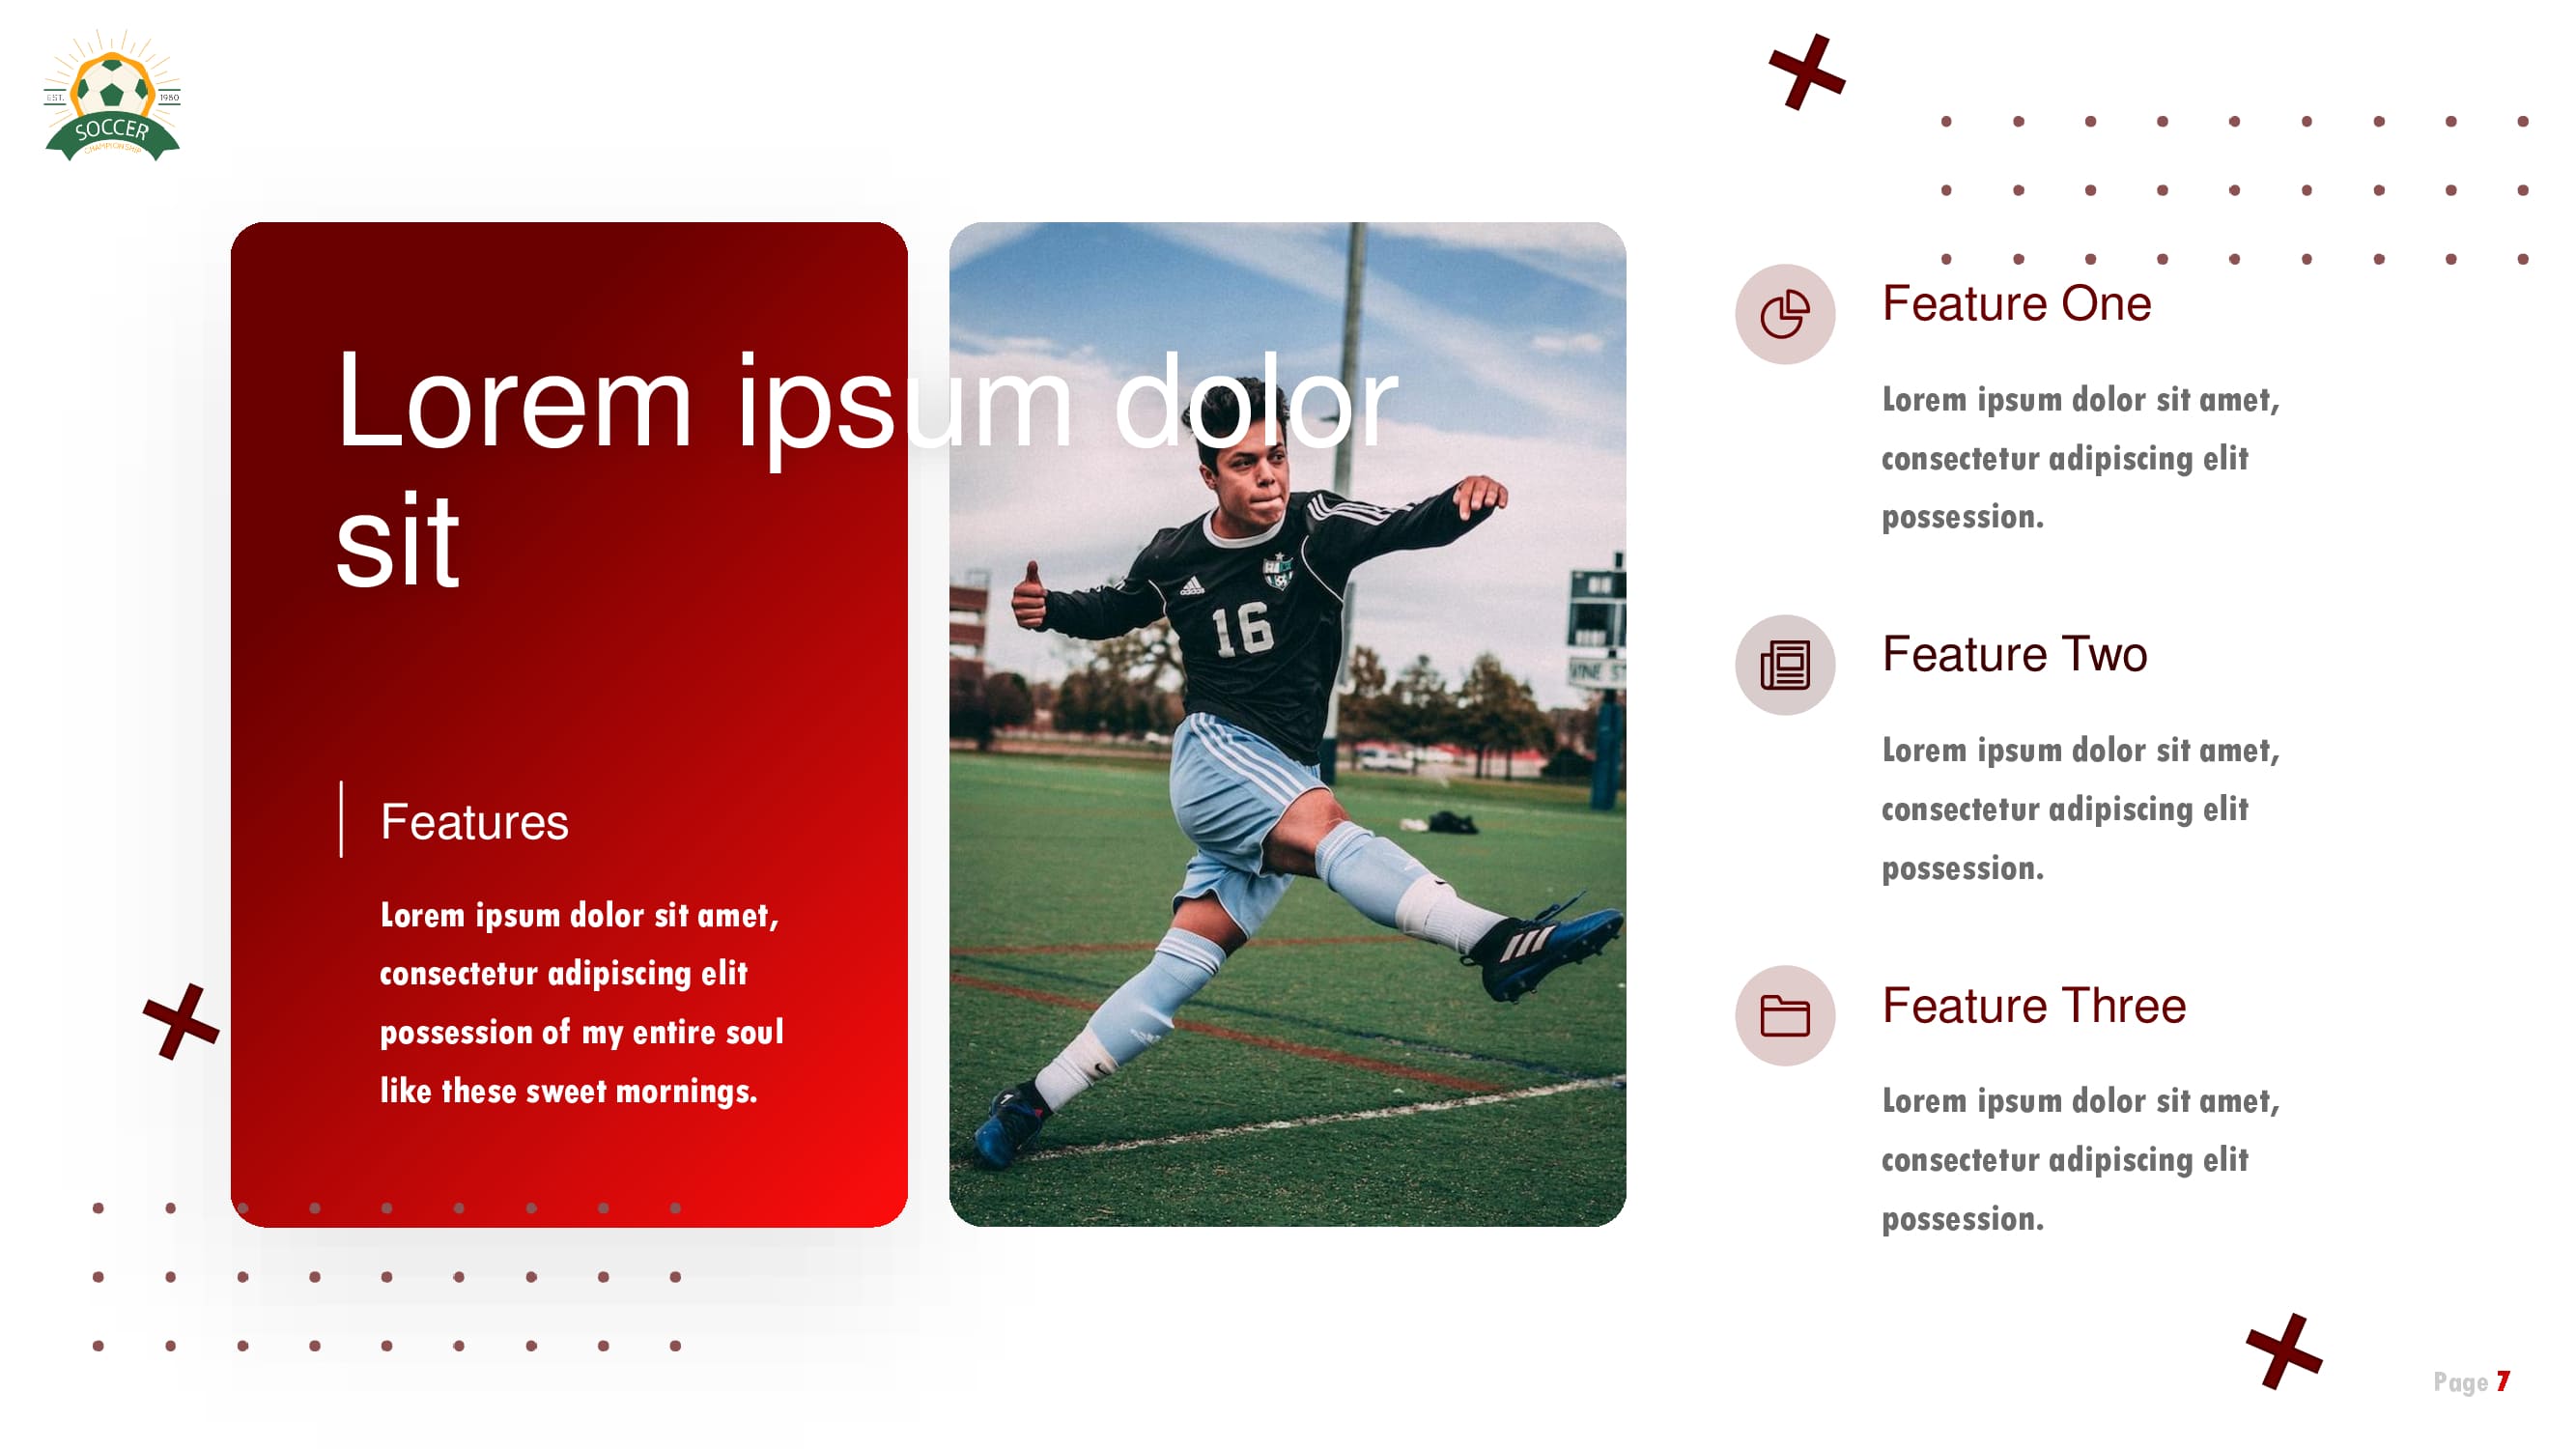 Beautiful slide for 3 features and image of a soccer.